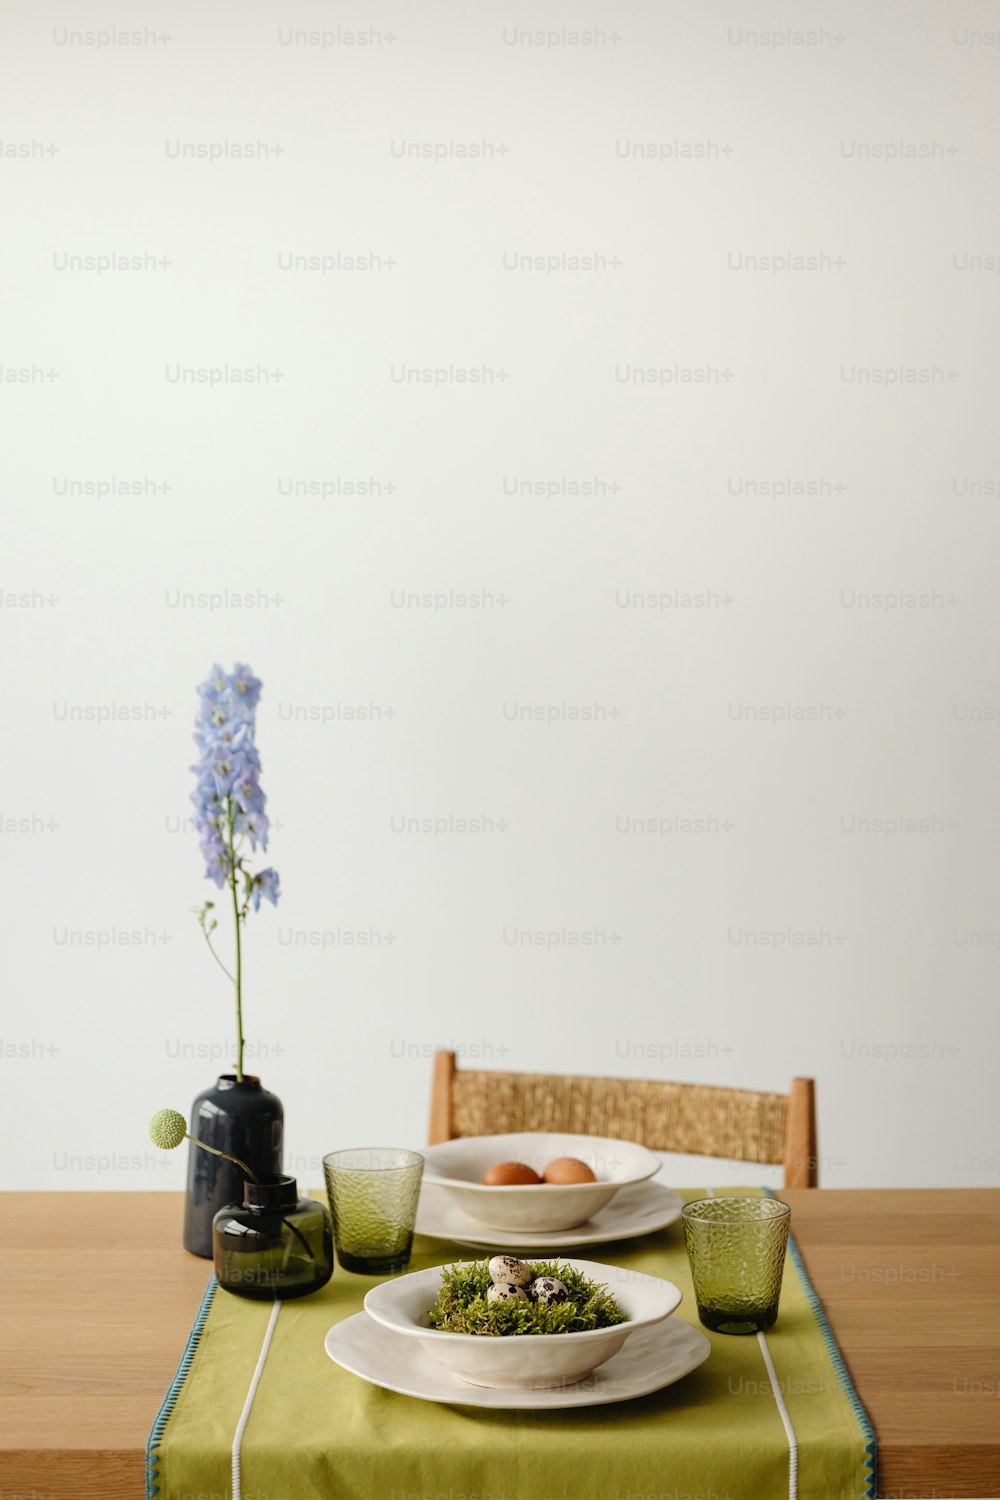 a table topped with plates of food next to a vase of flowers